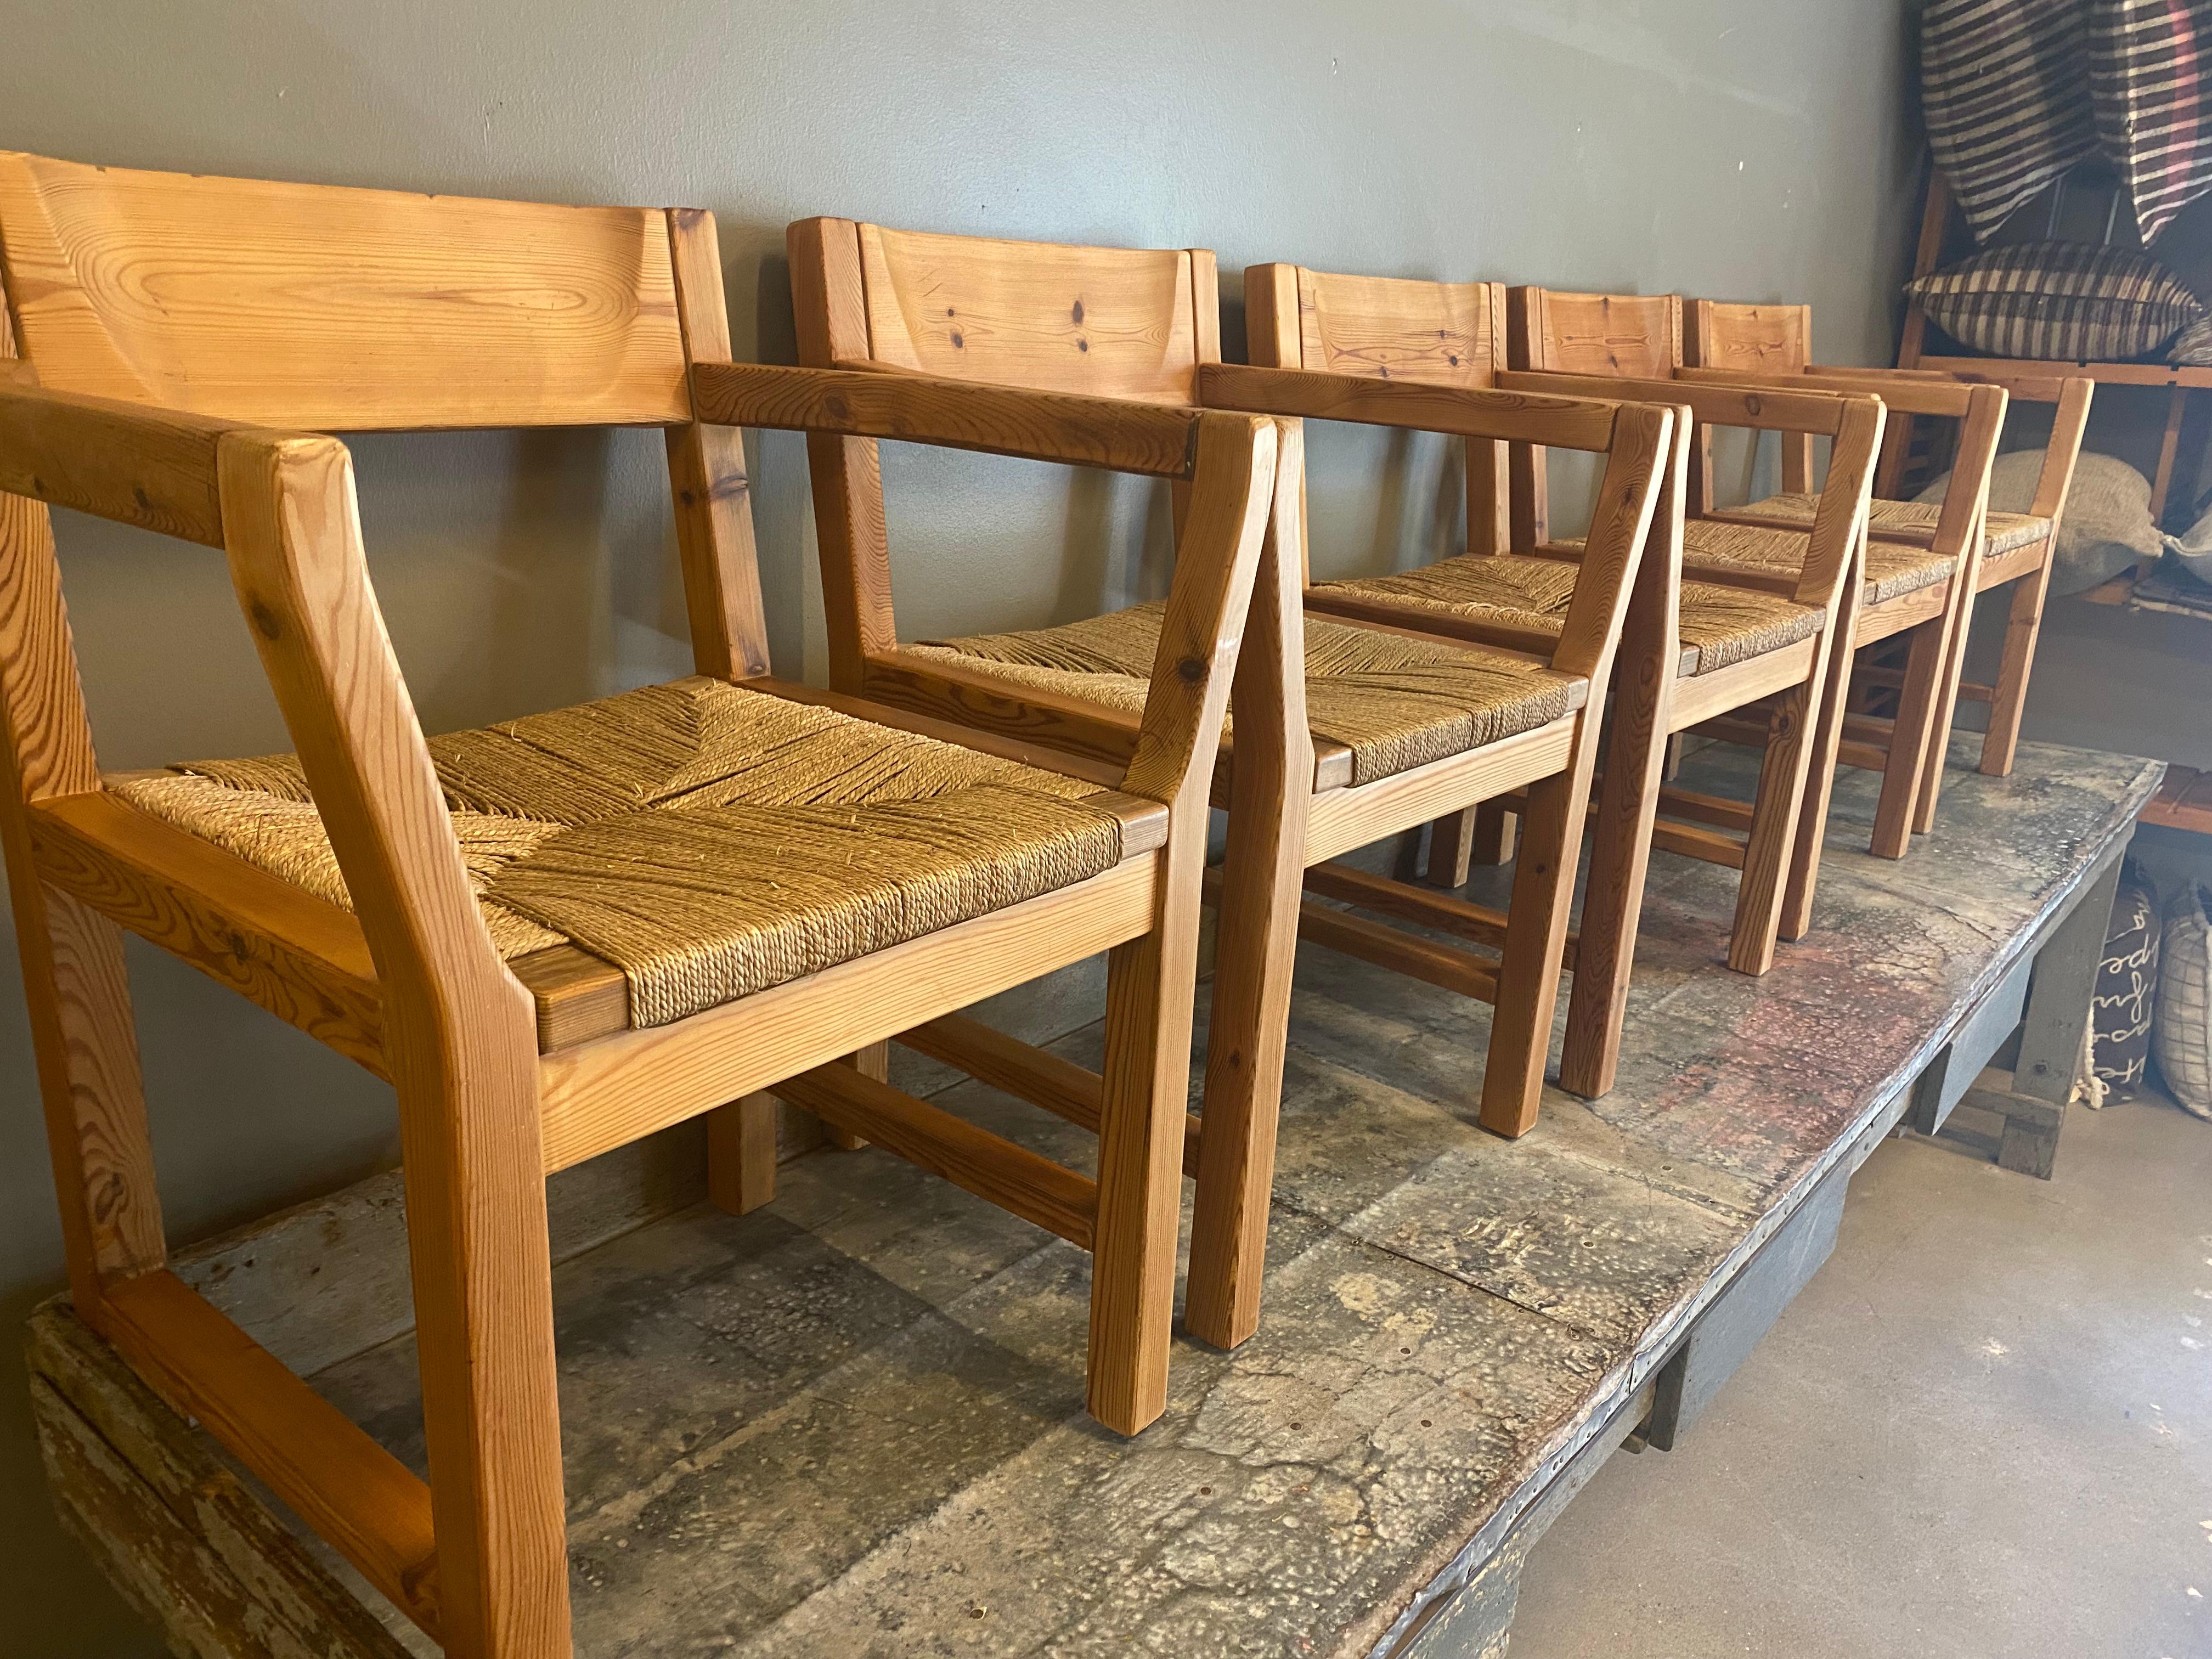 Scandinavian Modern style set of dining chairs with solid pine armed frames and rush seats. Very sturdy and comfortable. 1970's.